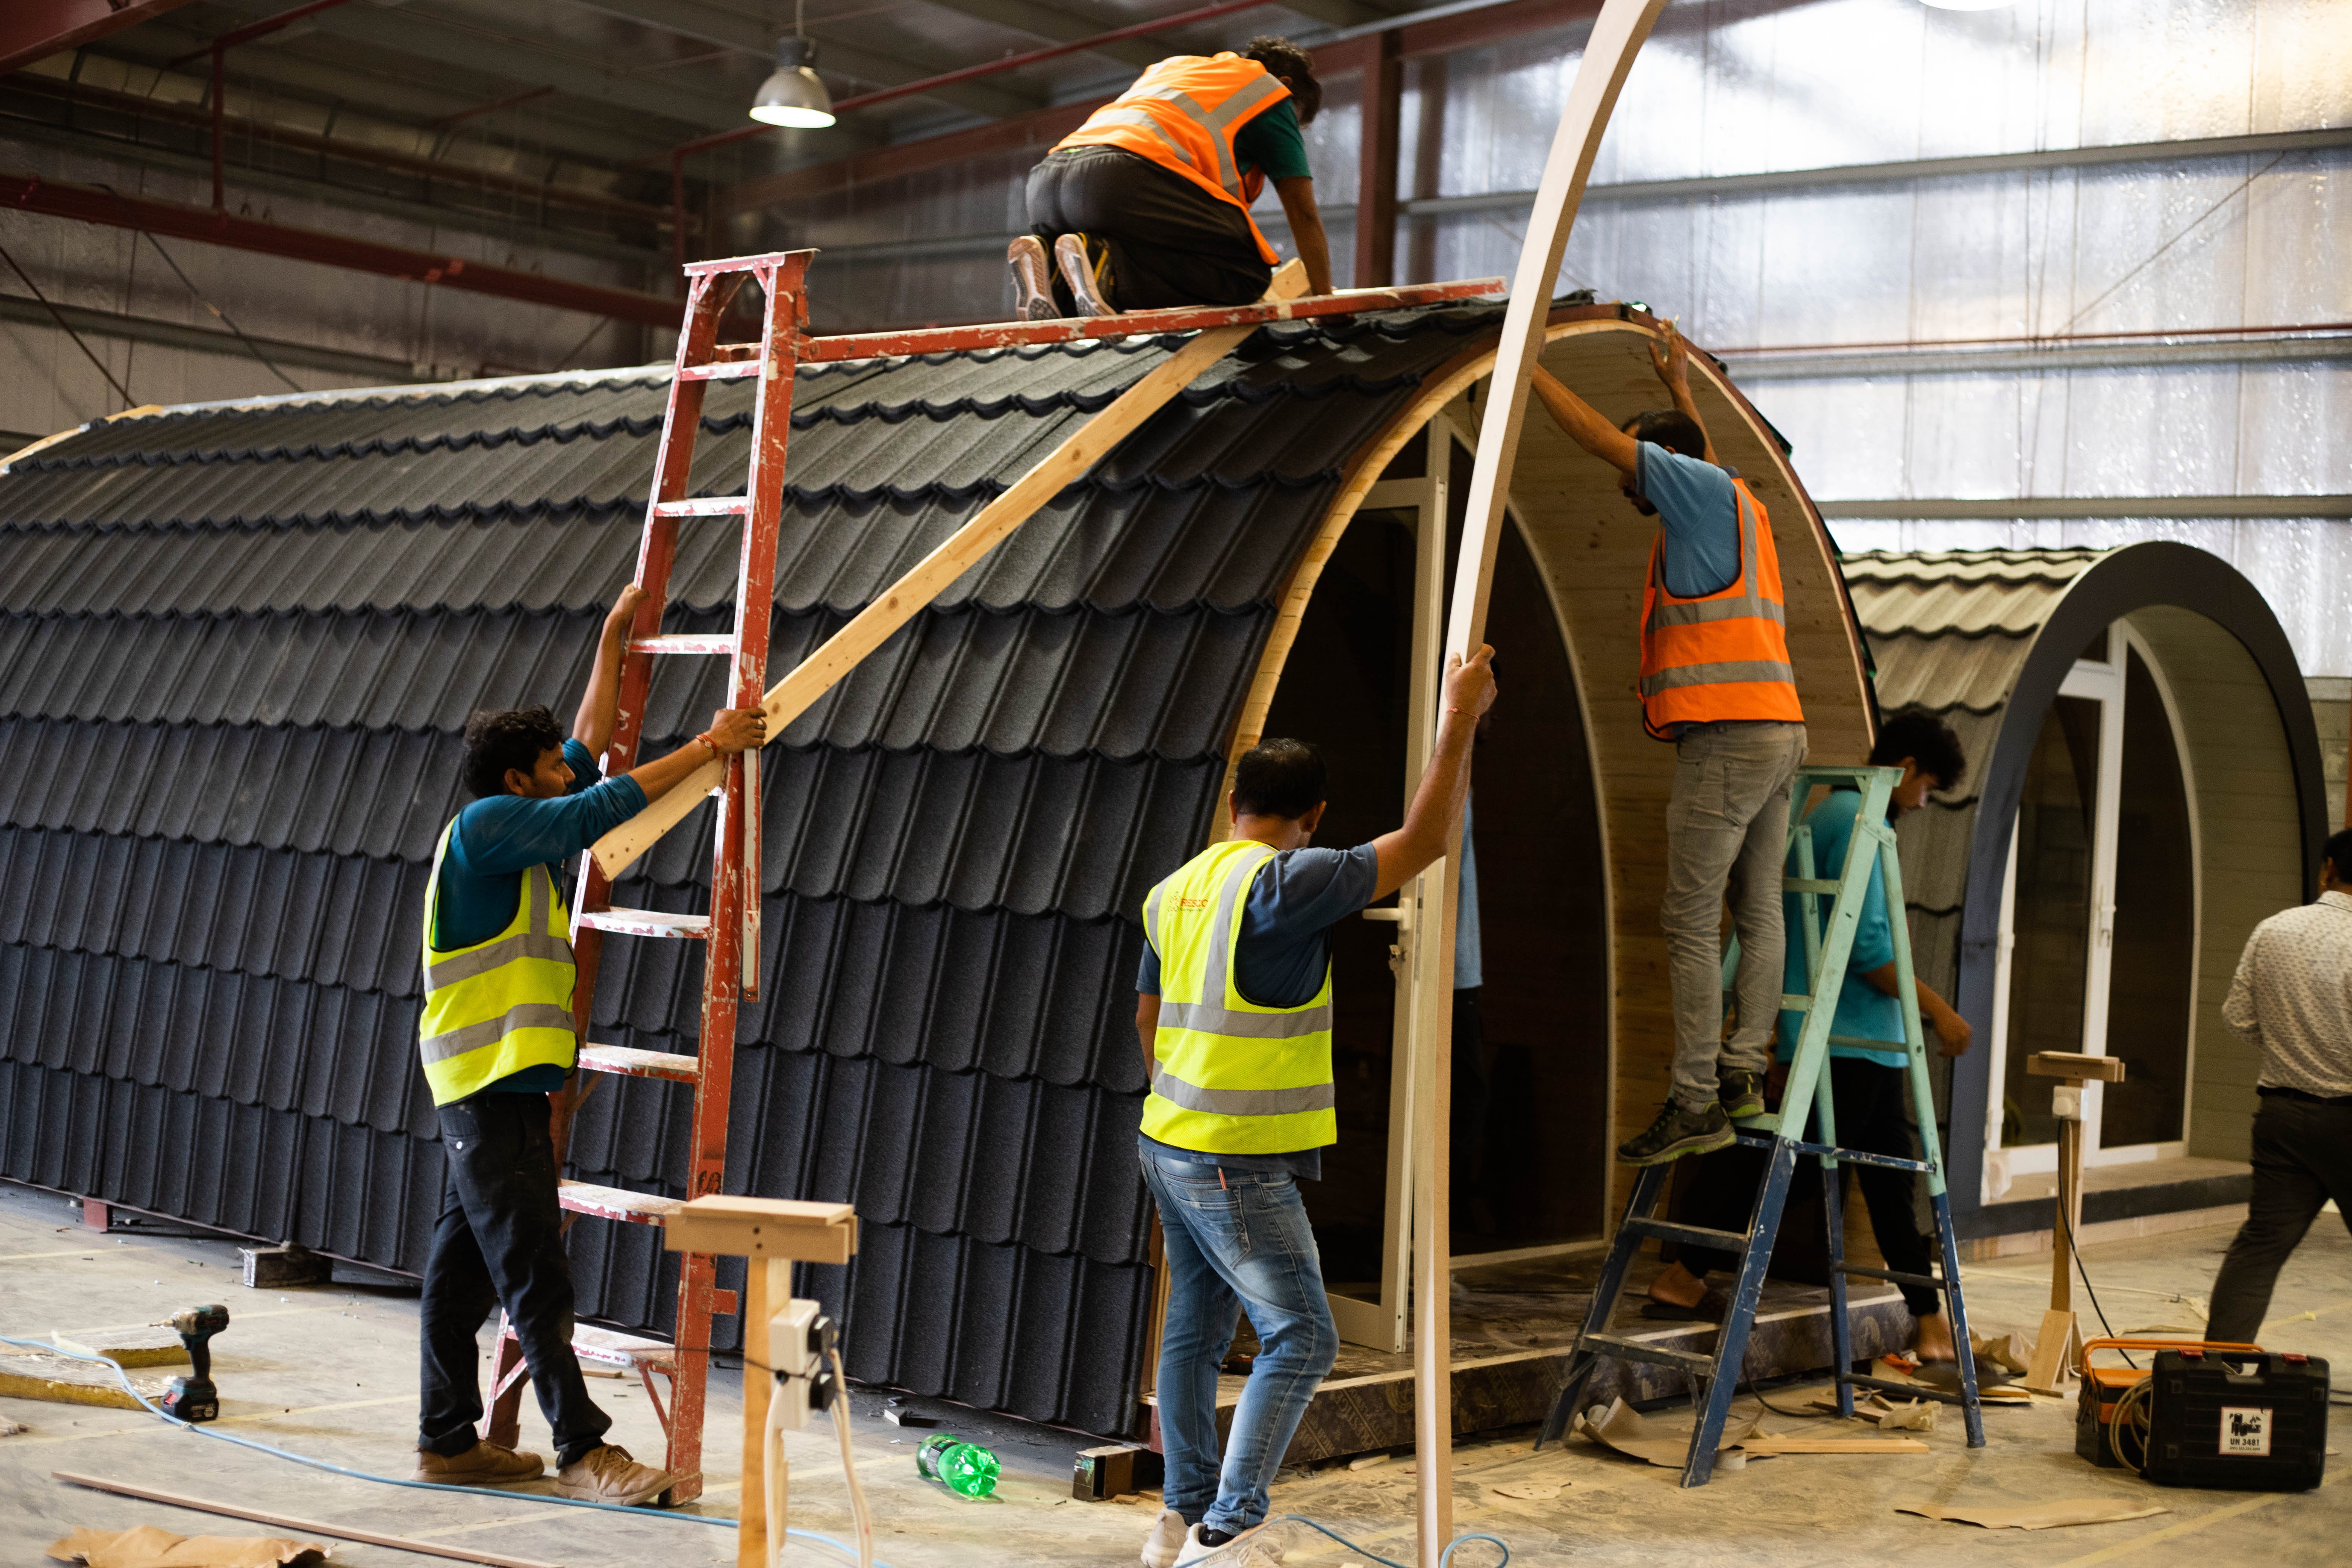 Glamping pod being built to be delivered to saudi arabia